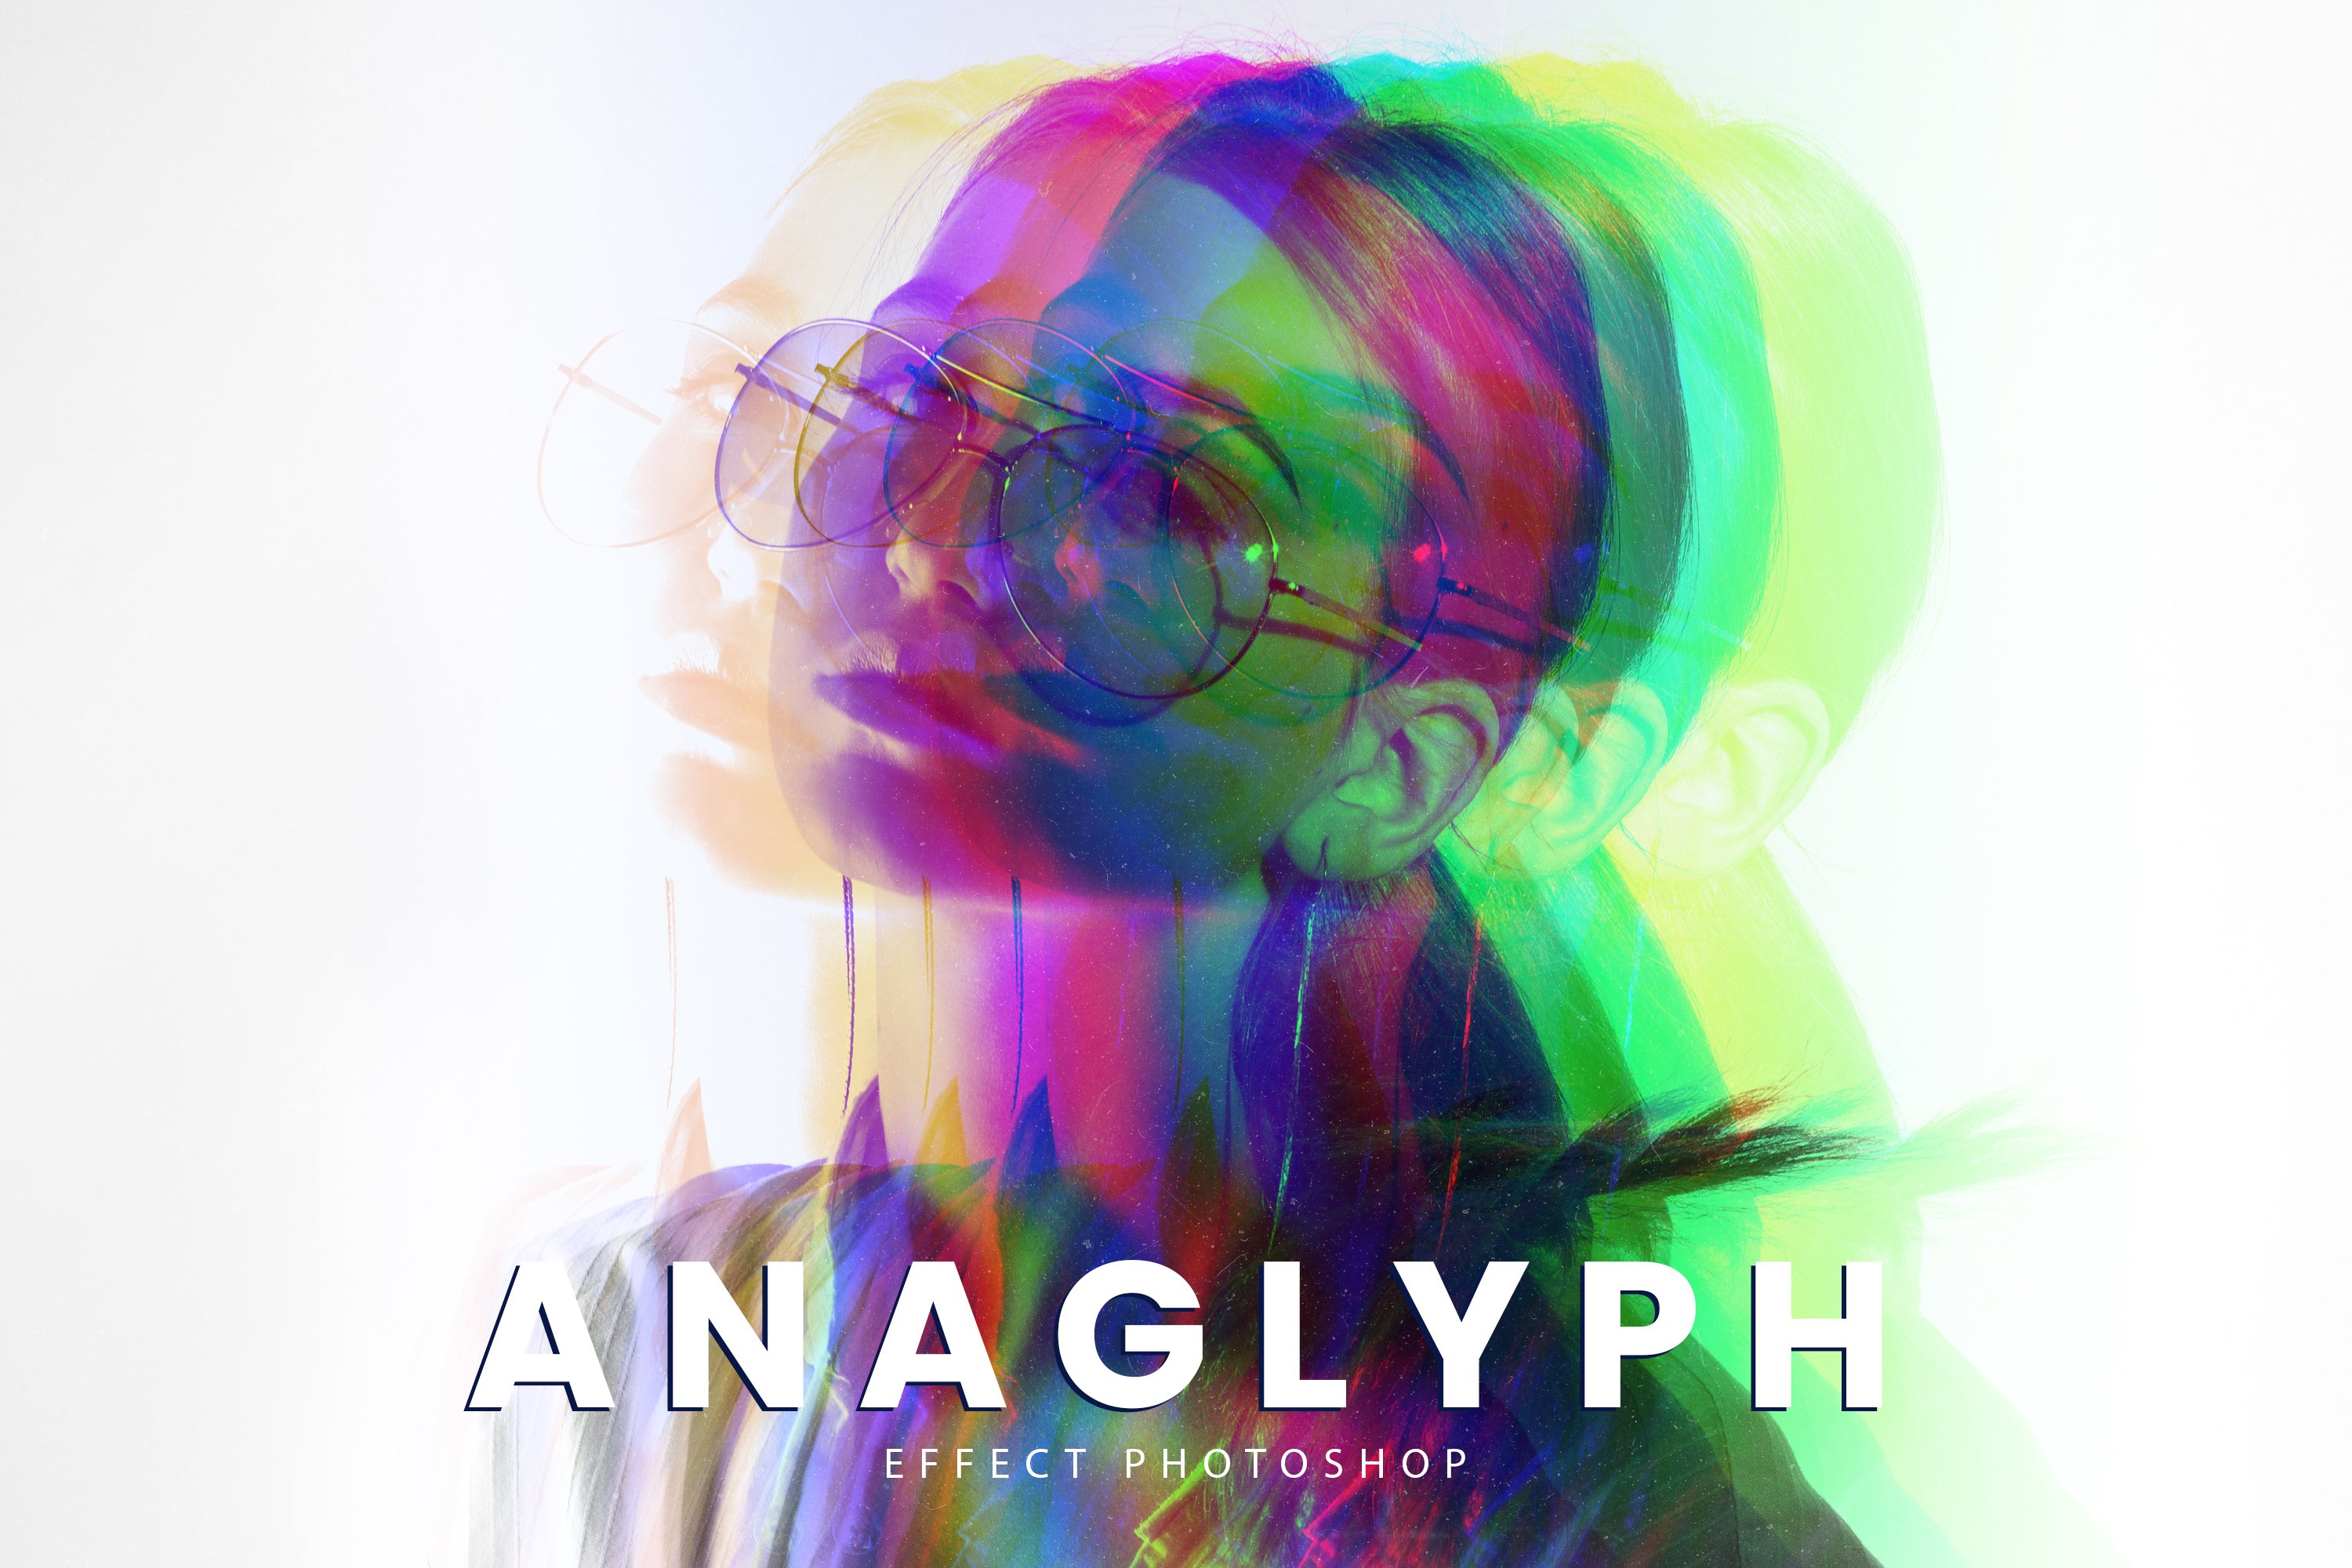 Anaglyph 3d Effect Photoshopcover image.